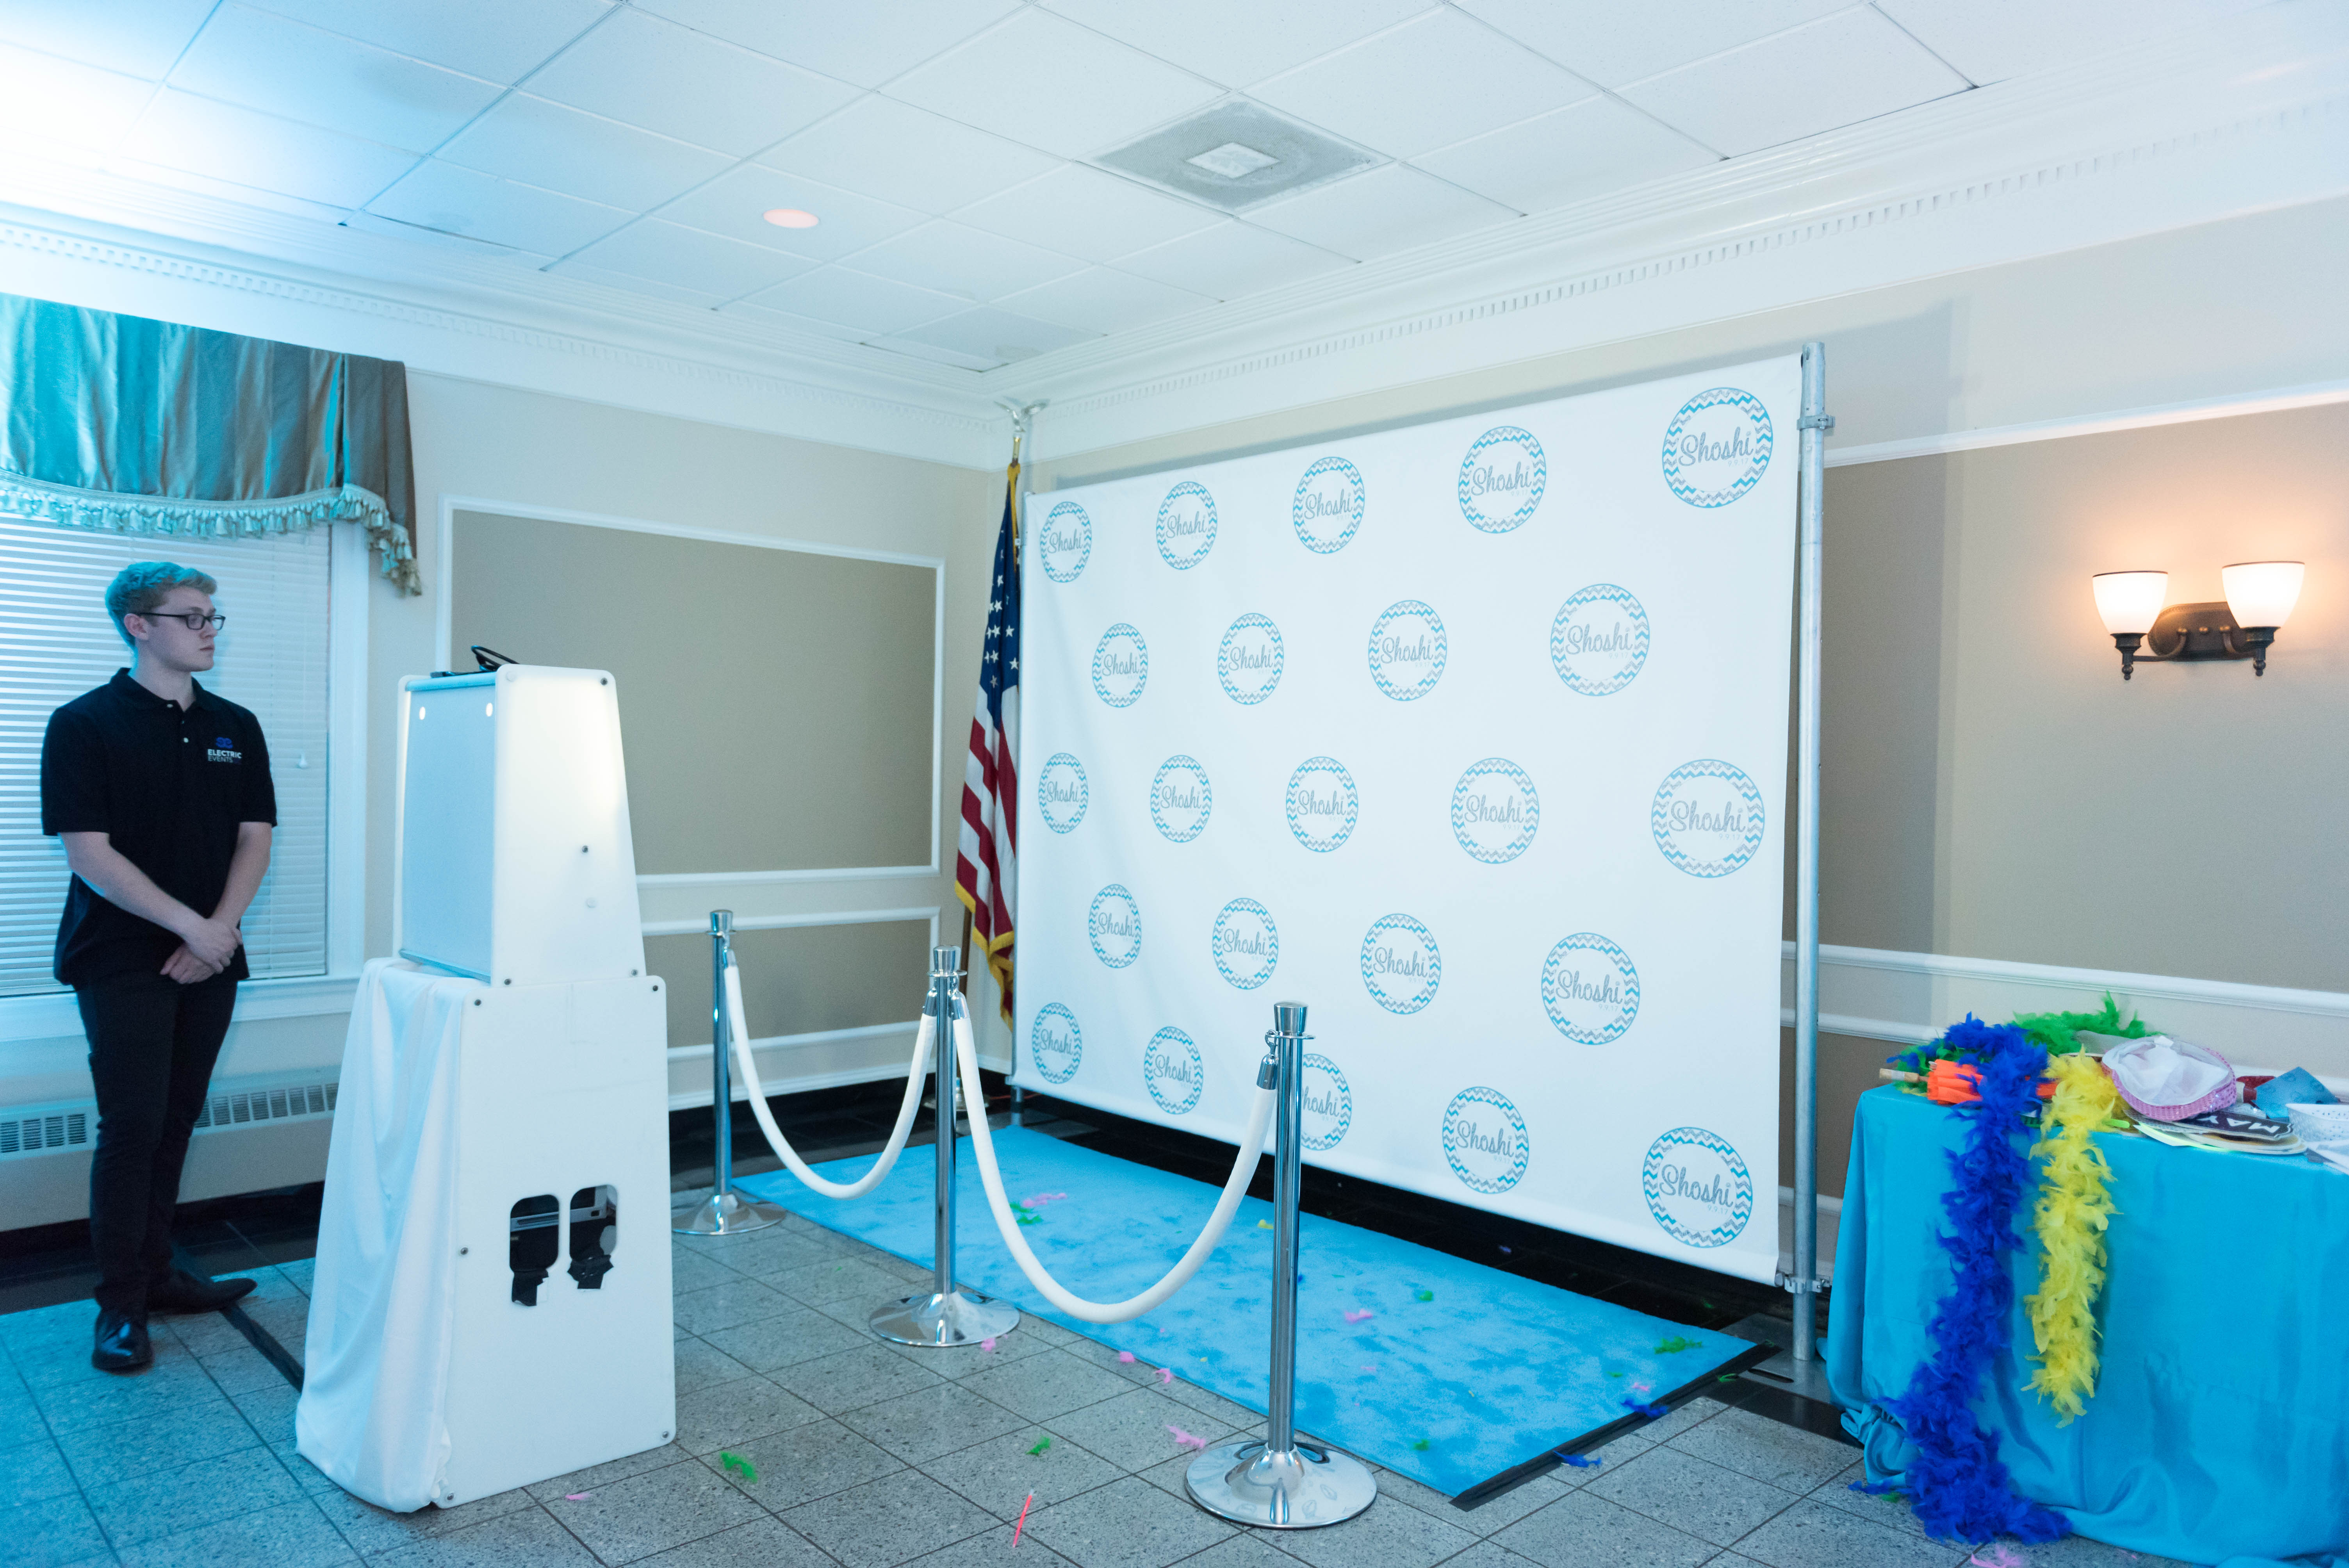 Photo booth with step and repeat | Pop Color Events | Adding a Pop of Color to Bar & Bat Mitzvahs in DC, MD & VA | Photo by A La Mode Photograpy